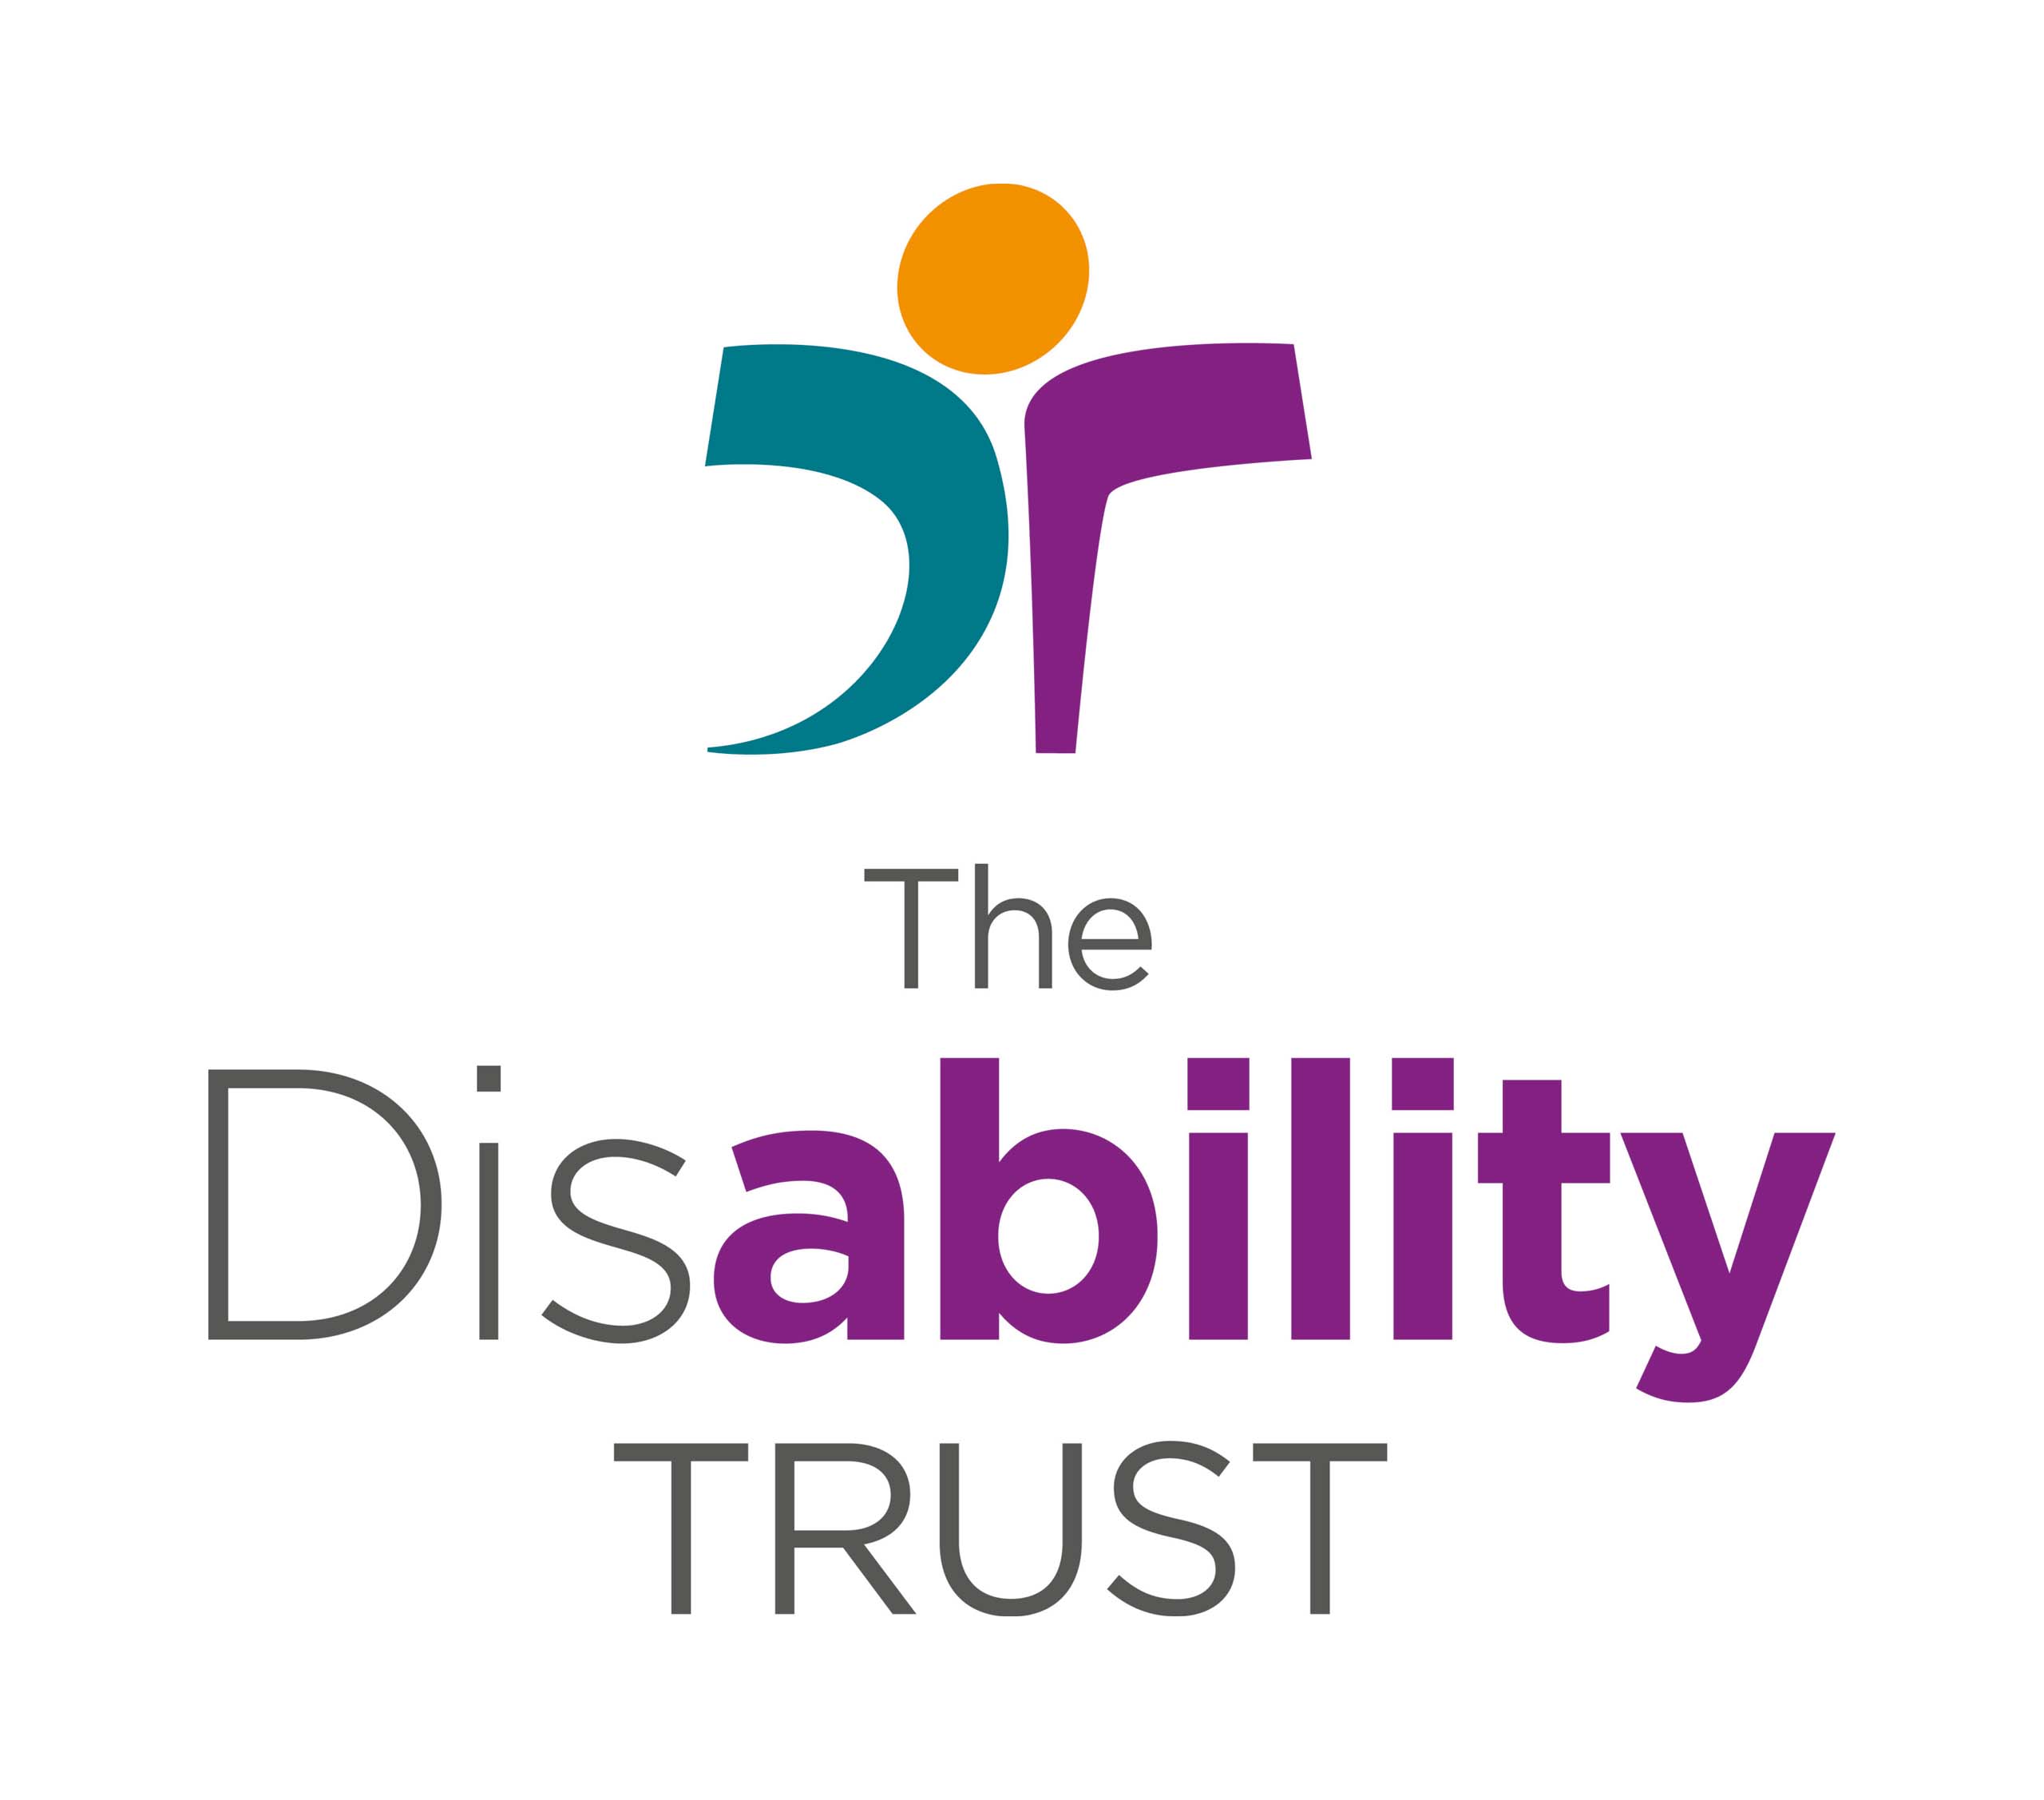 The Disability Trust